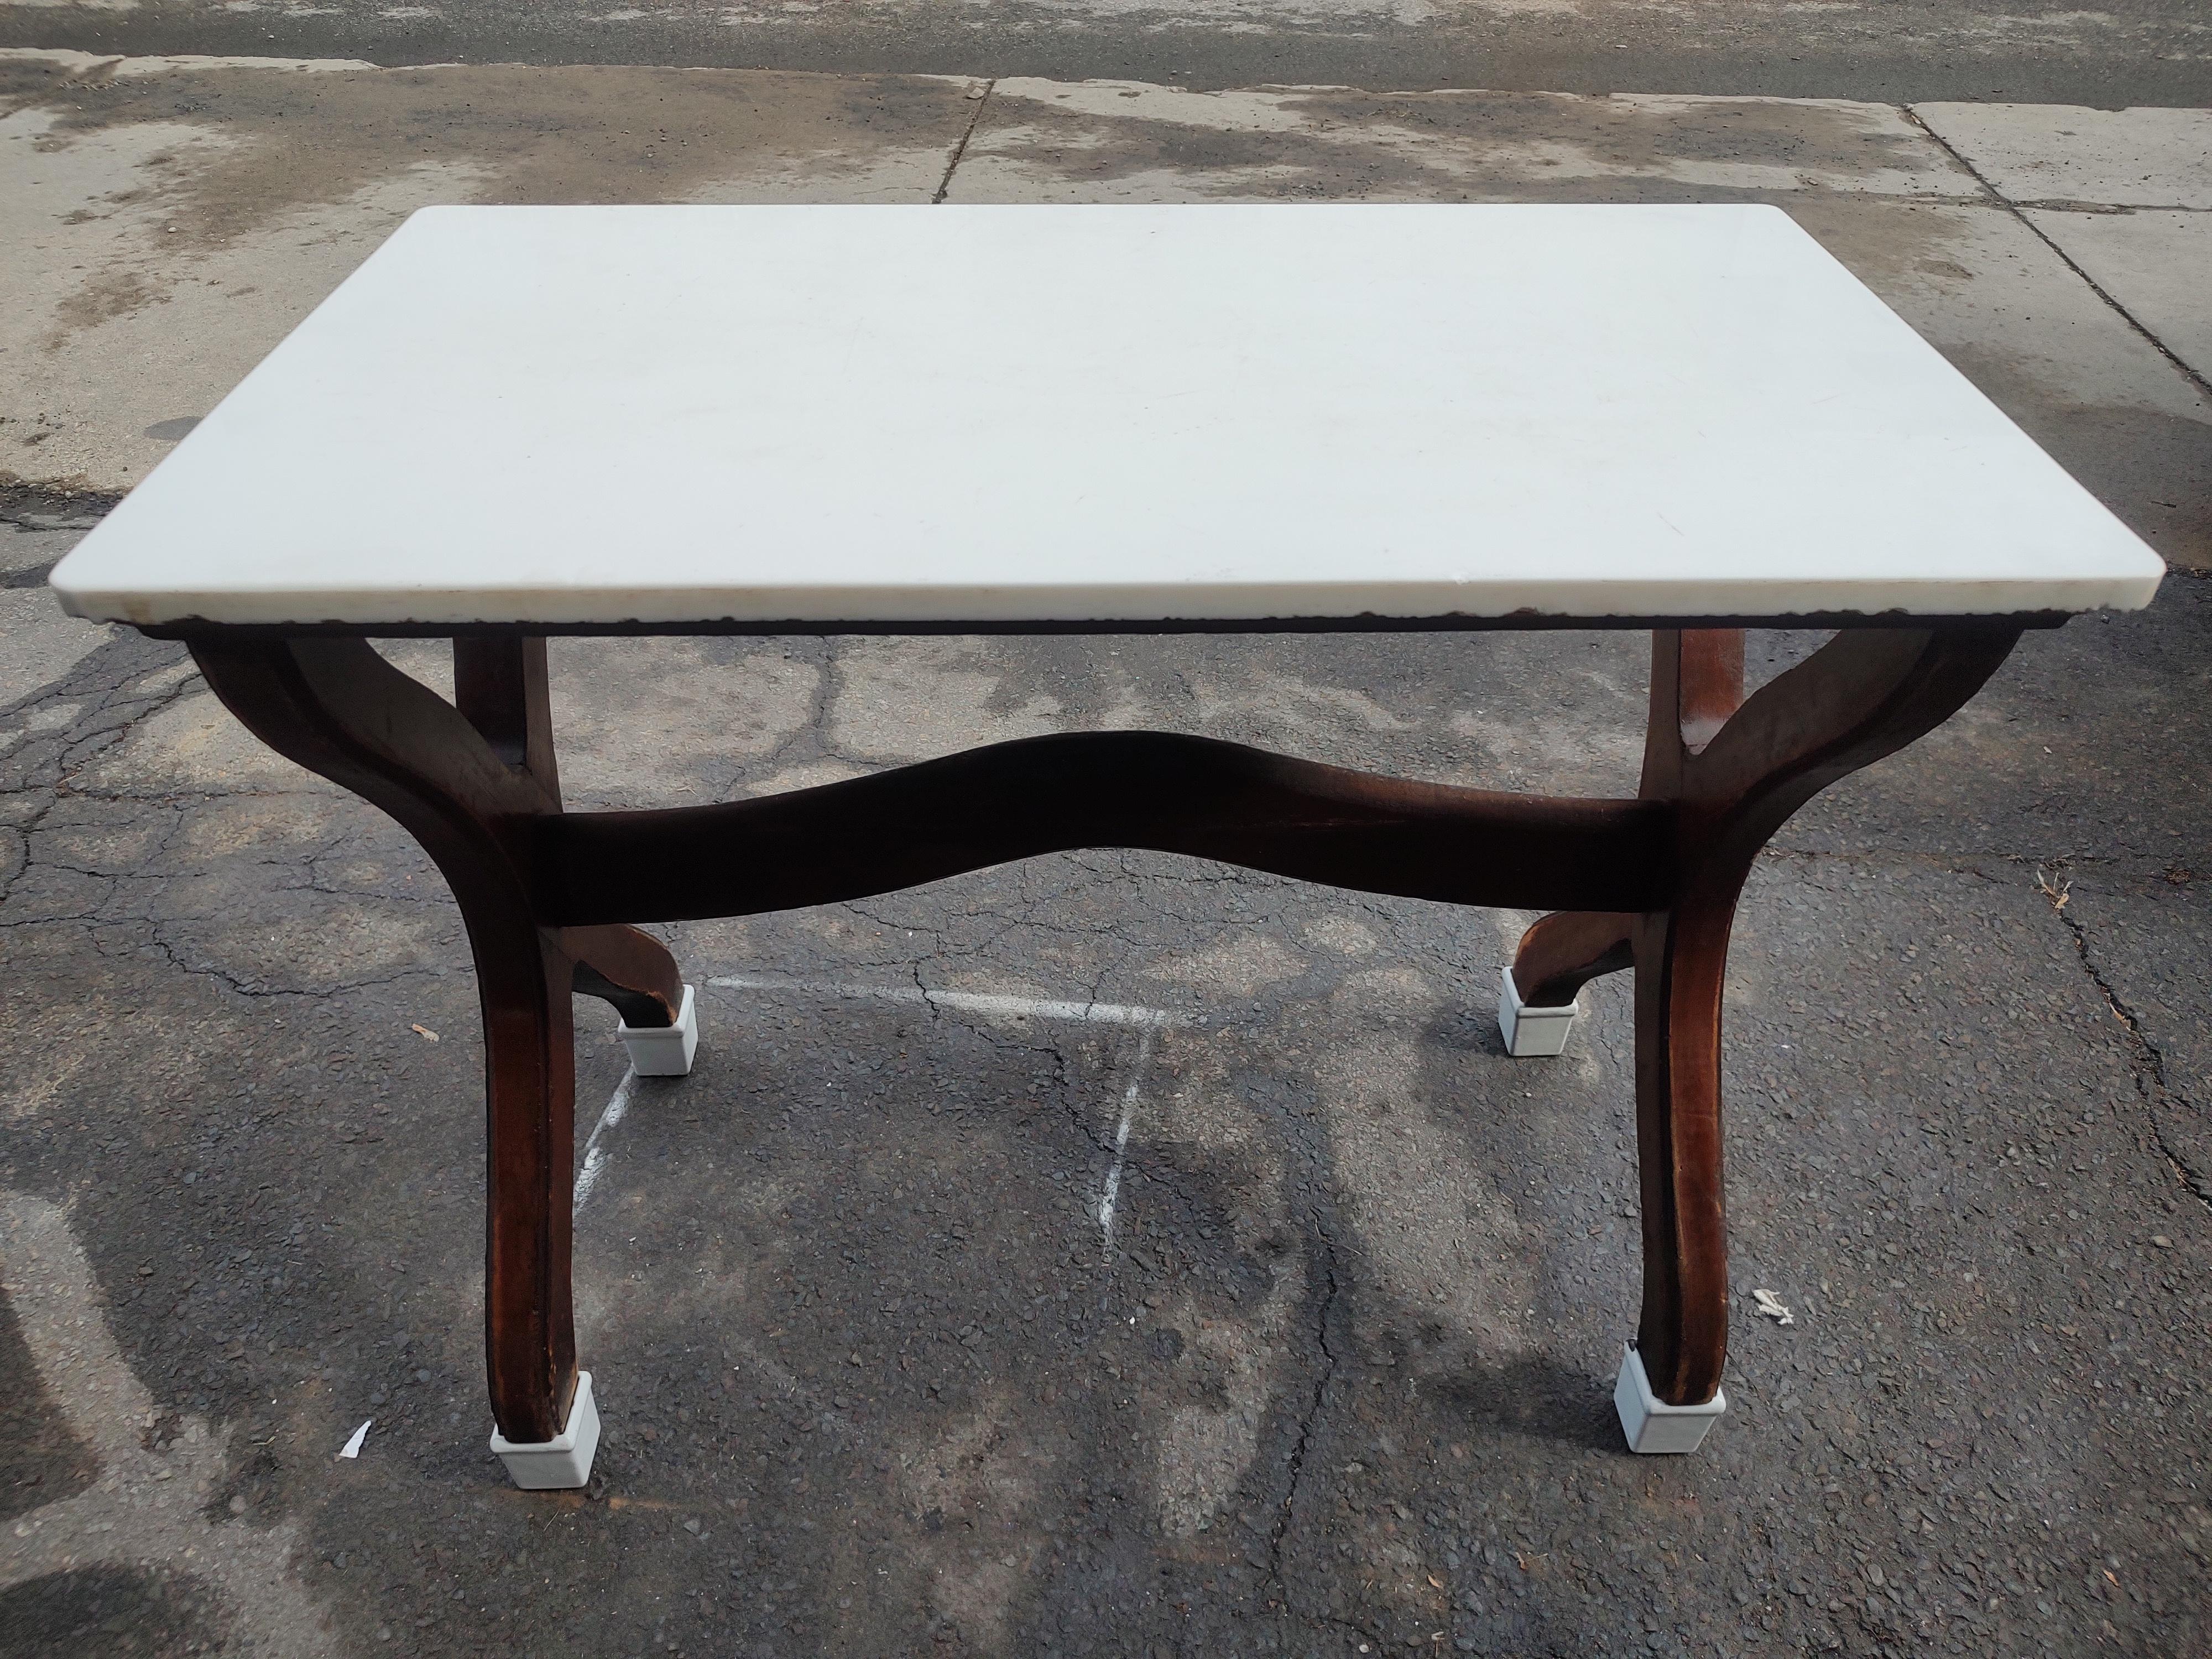 C1900 Ice Cream Parlour Table Mahogany Base with a Thick Milk Glass Top For Sale 2